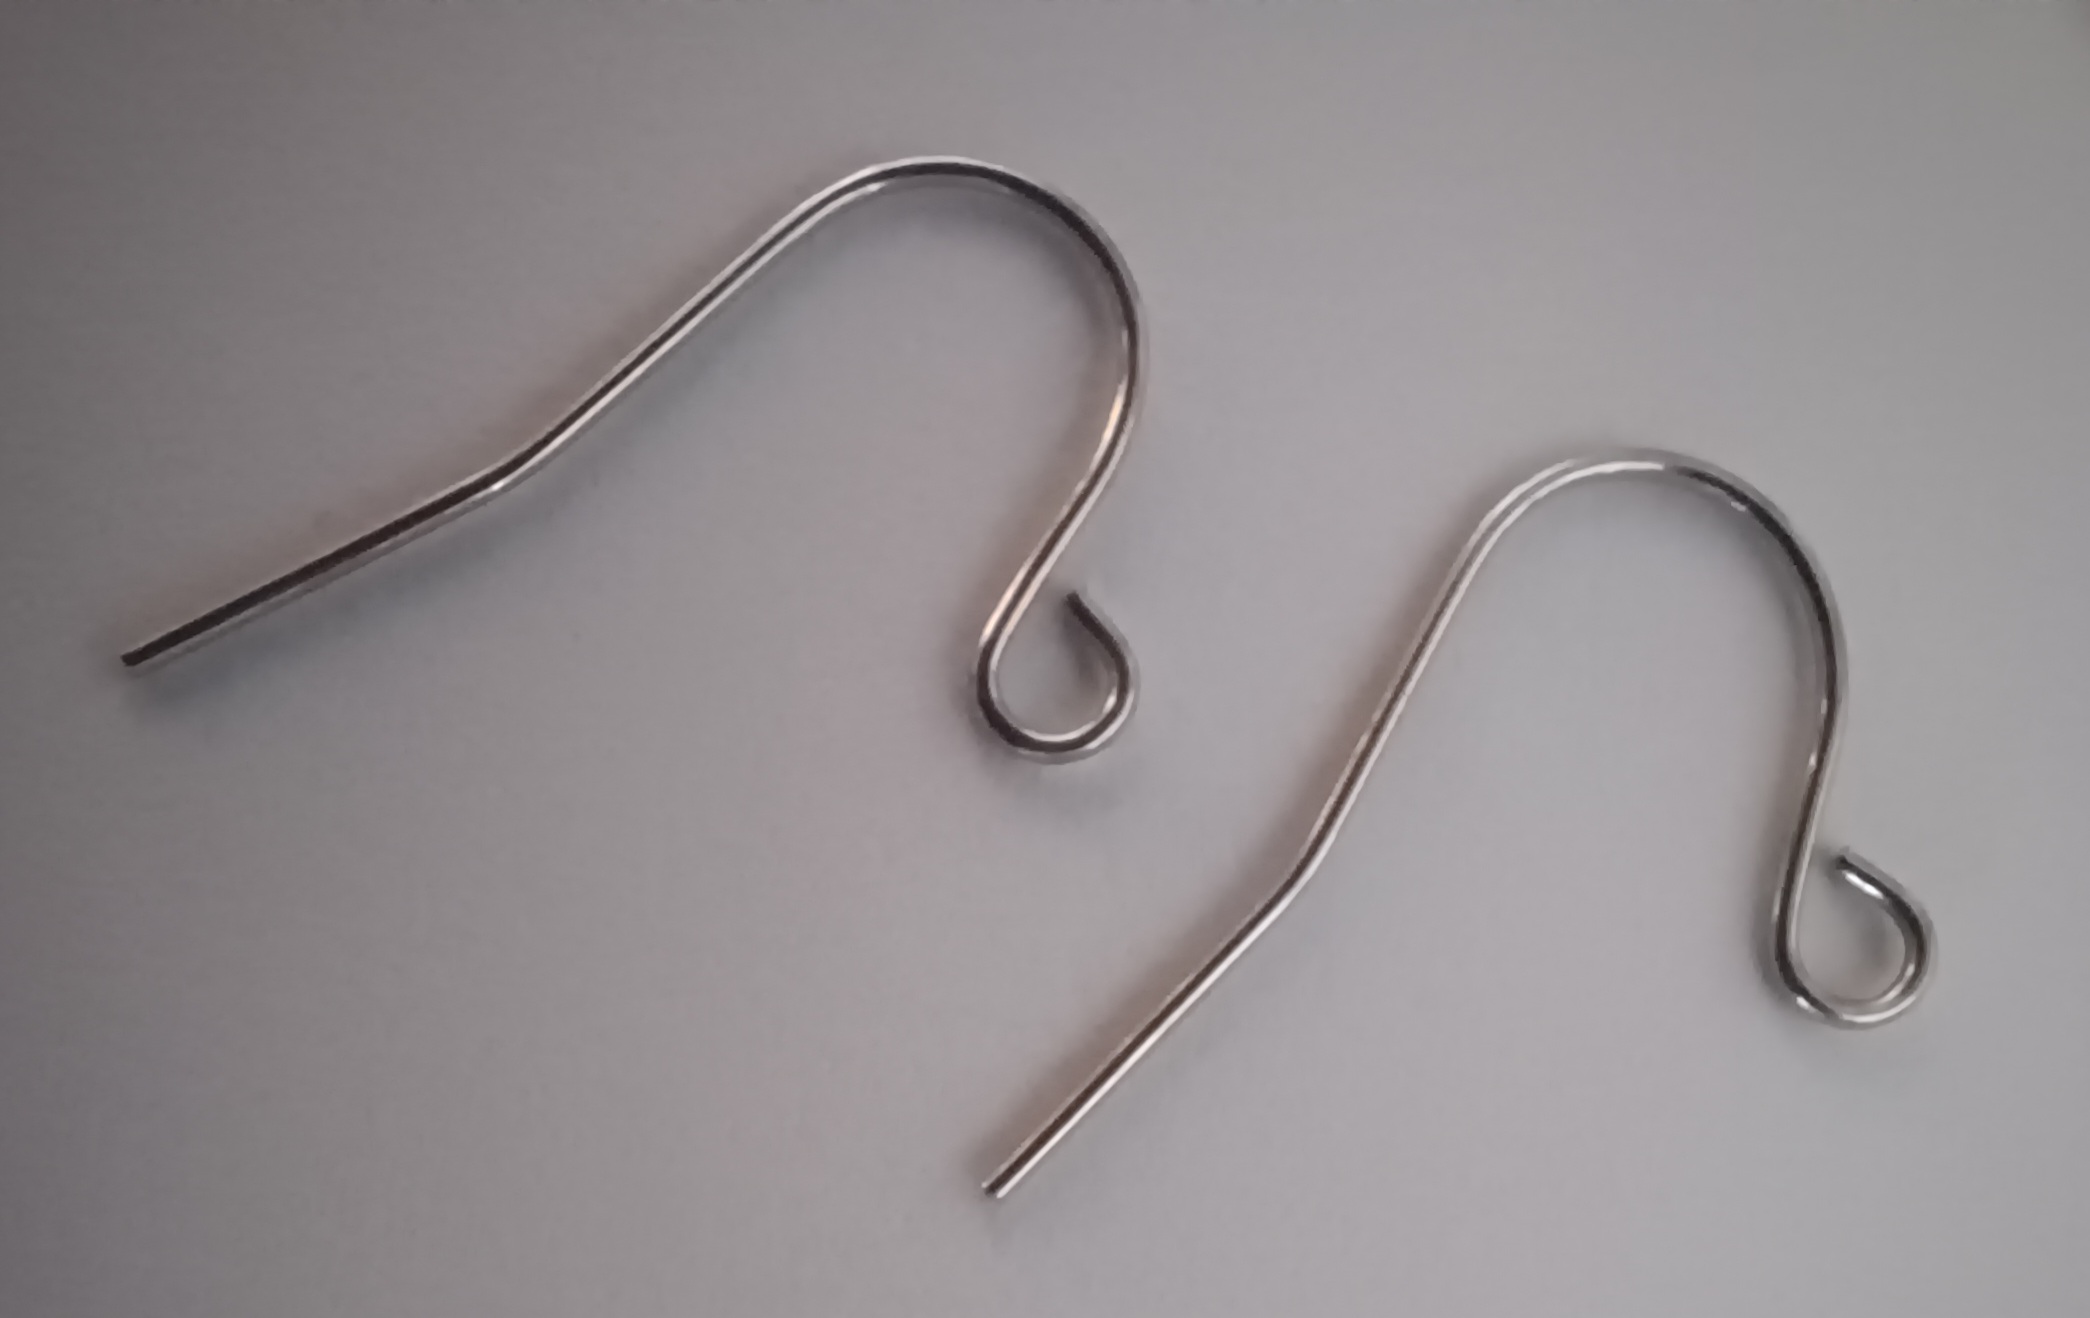 Stainless Steel Earring Wires - no spring (per pair)